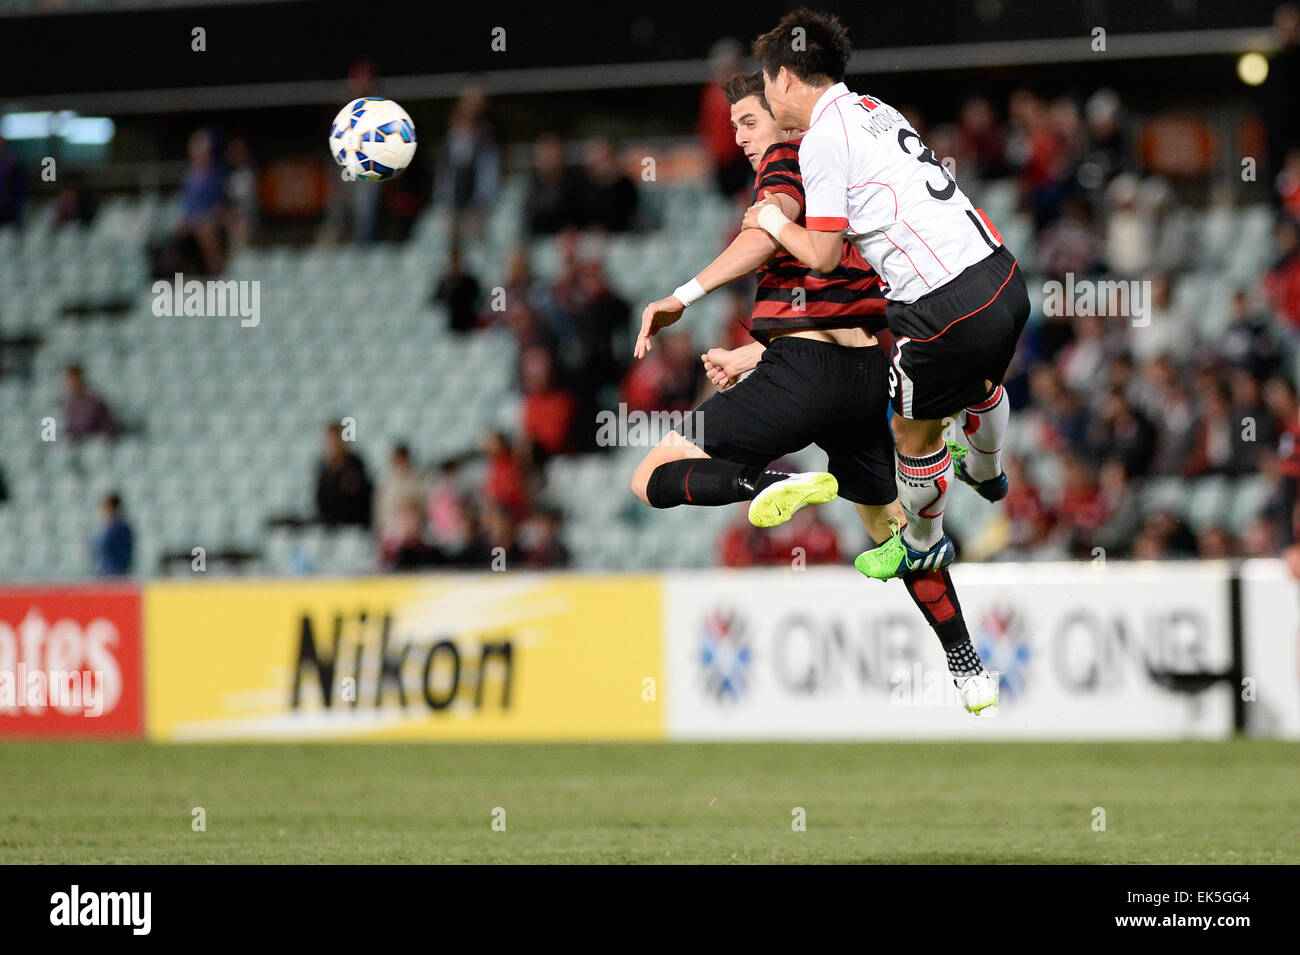 Sydney, Australia. 07th Apr, 2015. AFC Champions League. Western Sydney Wanderers versus FC Seoul. Seoul defender Lee Woong-hee beats Wanderers forward Tomi Juric to the ball. The game ended in a 1-1 draw. Credit:  Action Plus Sports/Alamy Live News Stock Photo